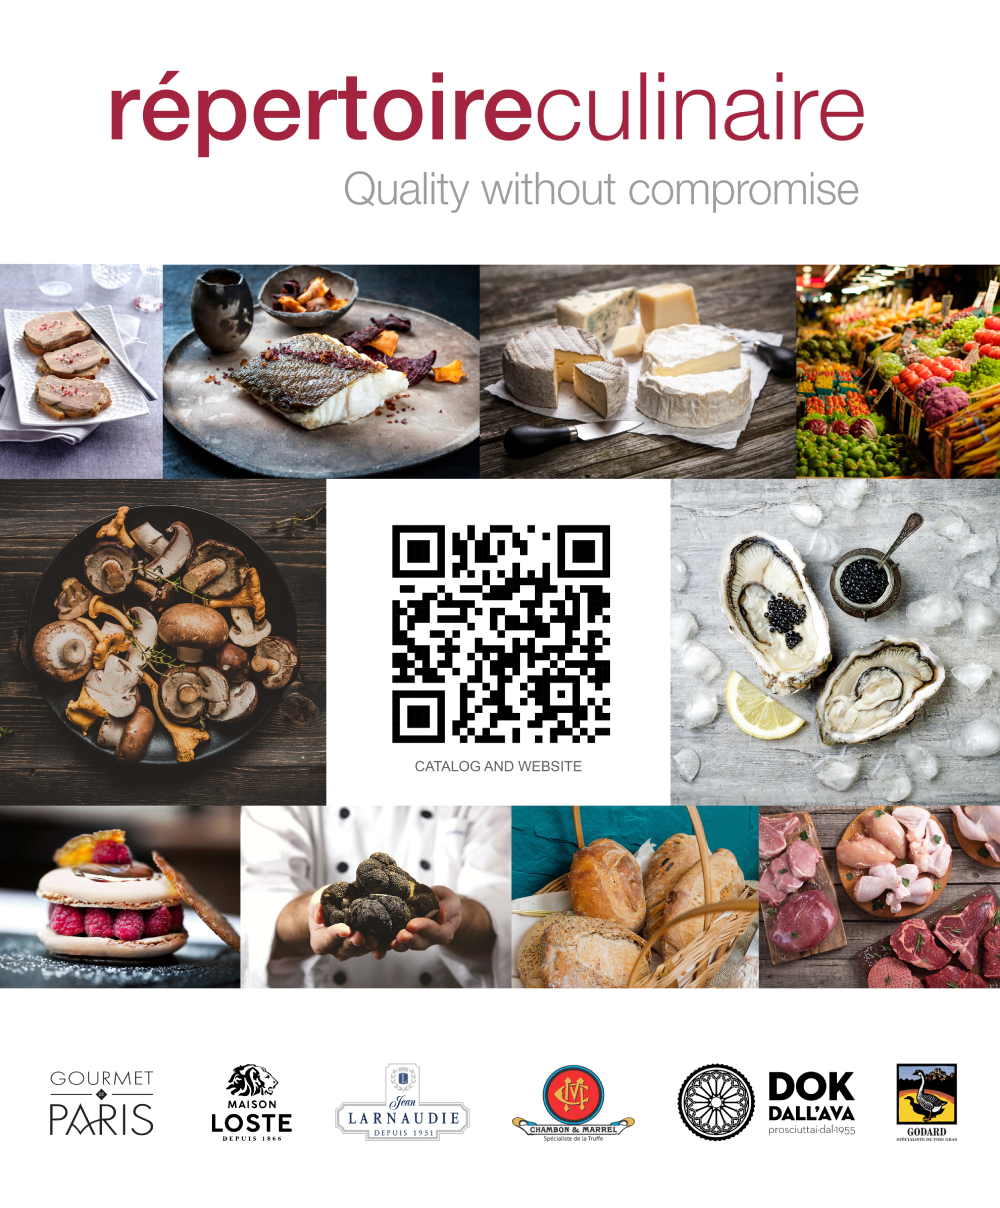 INTRODUCING REPERTORIE CULINAIRE